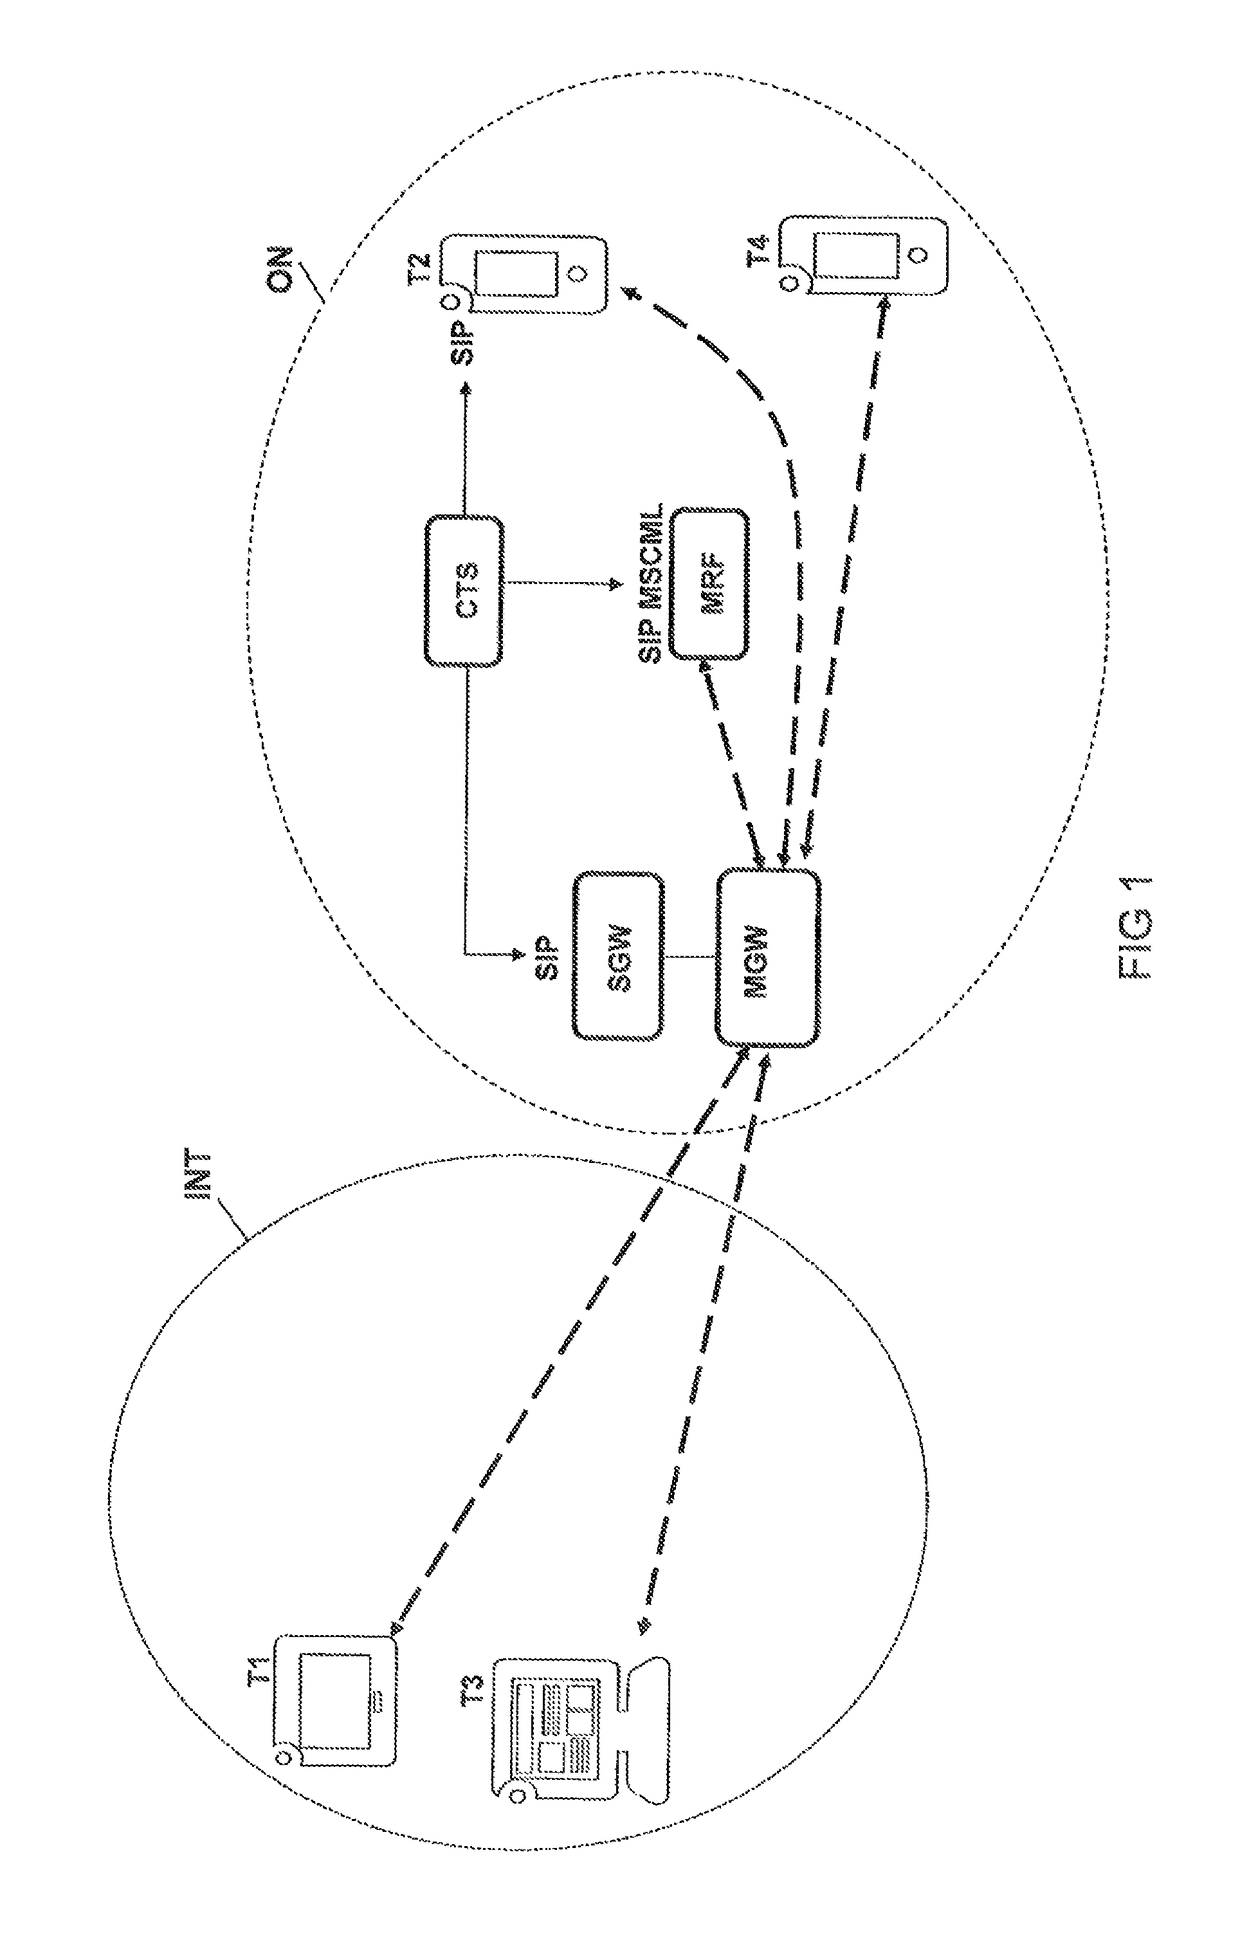 Mediator for optimizing the transmission of media contents between a multimedia resource function and a plurality of terminals